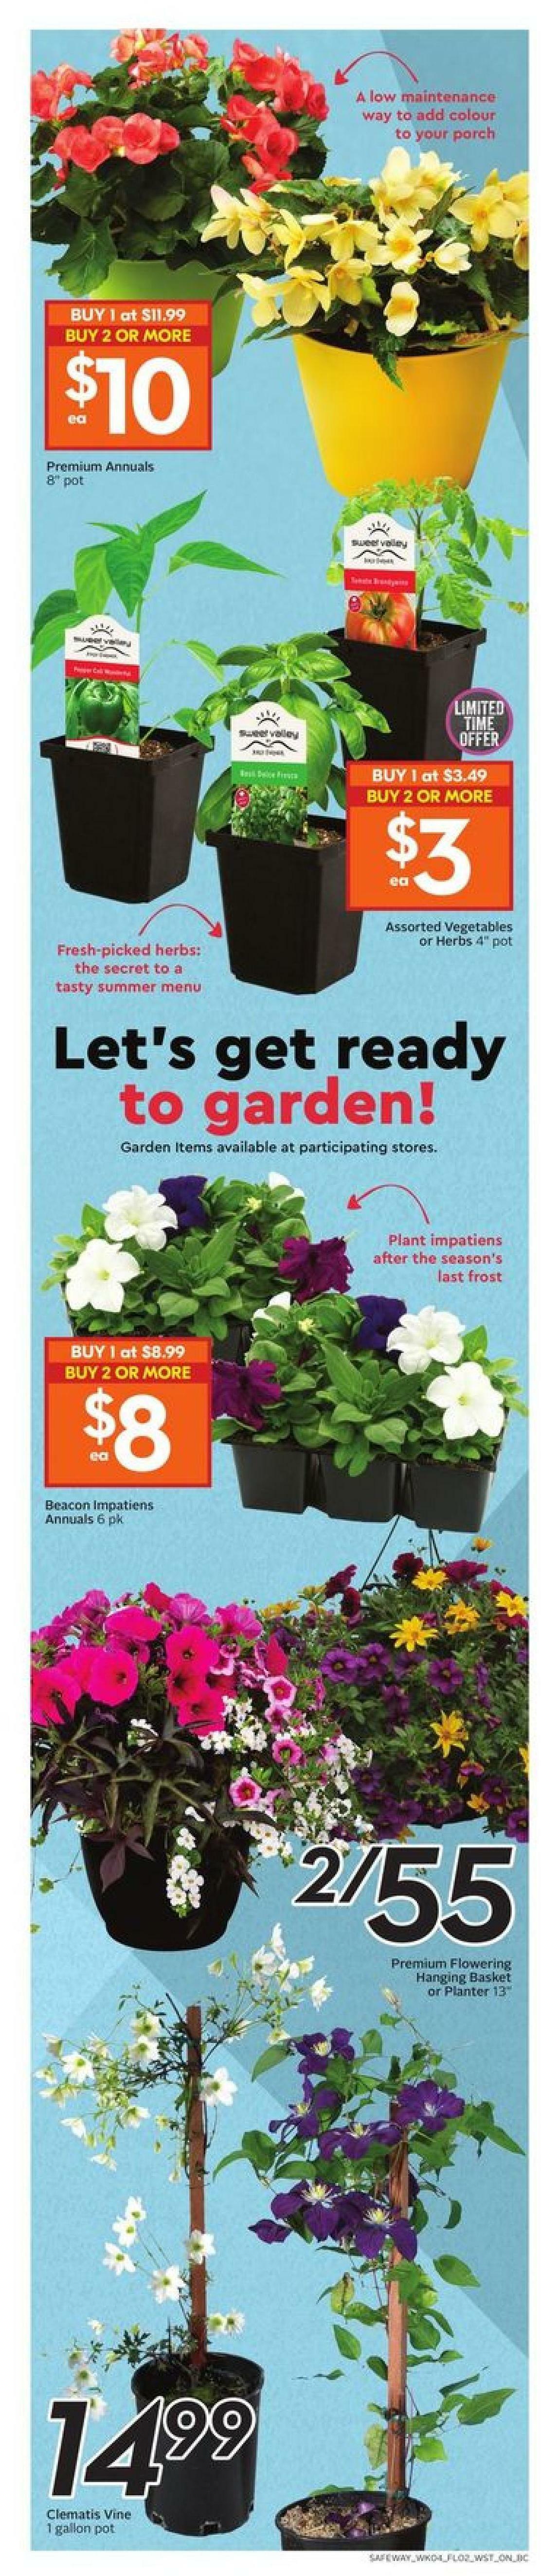 Safeway Flyer from May 20